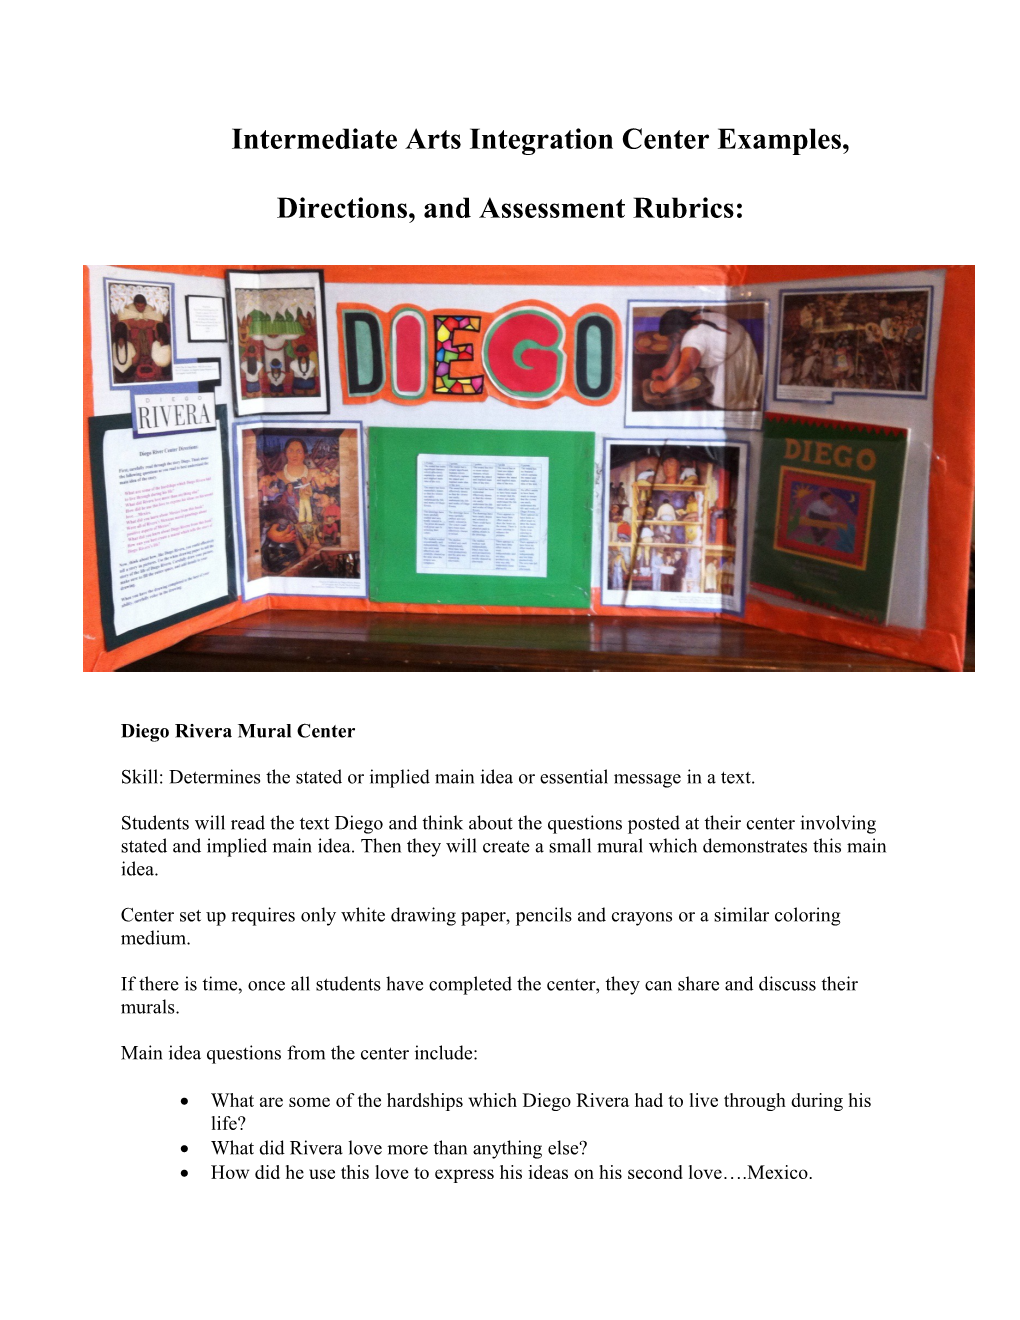 Intermediate Arts Integration Center Examples, Directions, and Assessment Rubrics